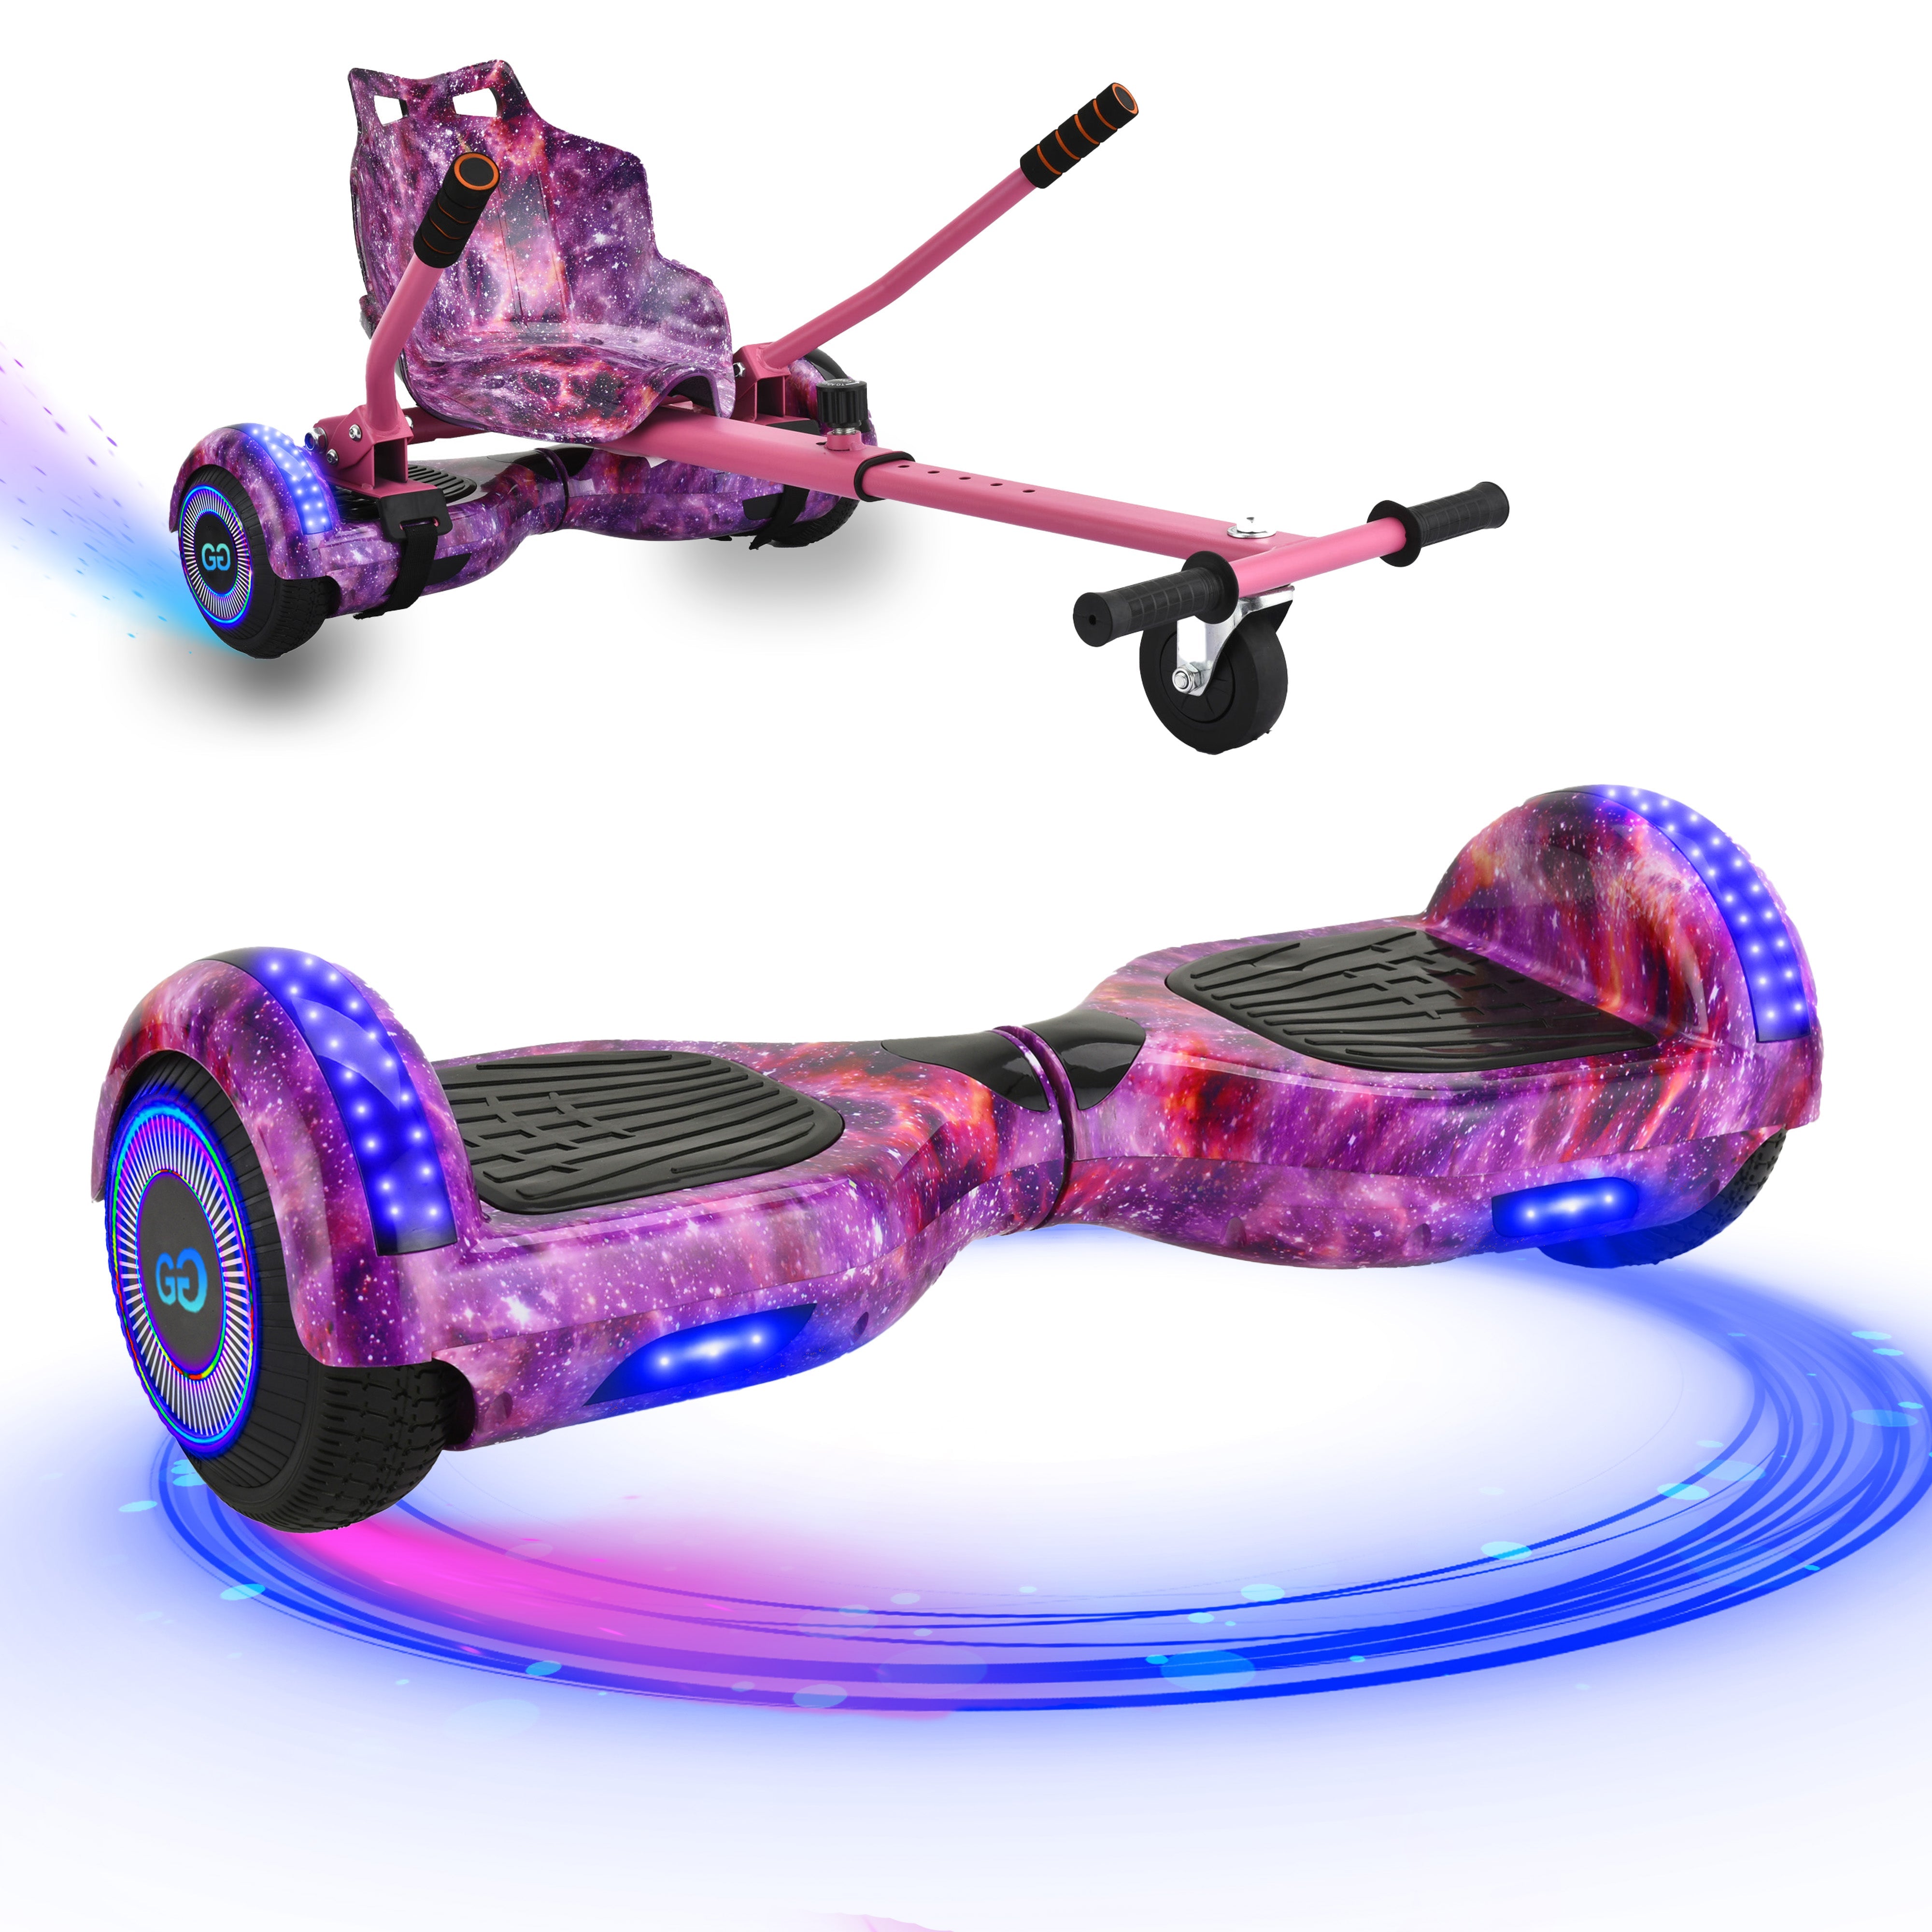 Hoverboard with galaxy pink and attached pink go-kart conversion kit, featuring light-up wheels and dynamic LED trail effects.